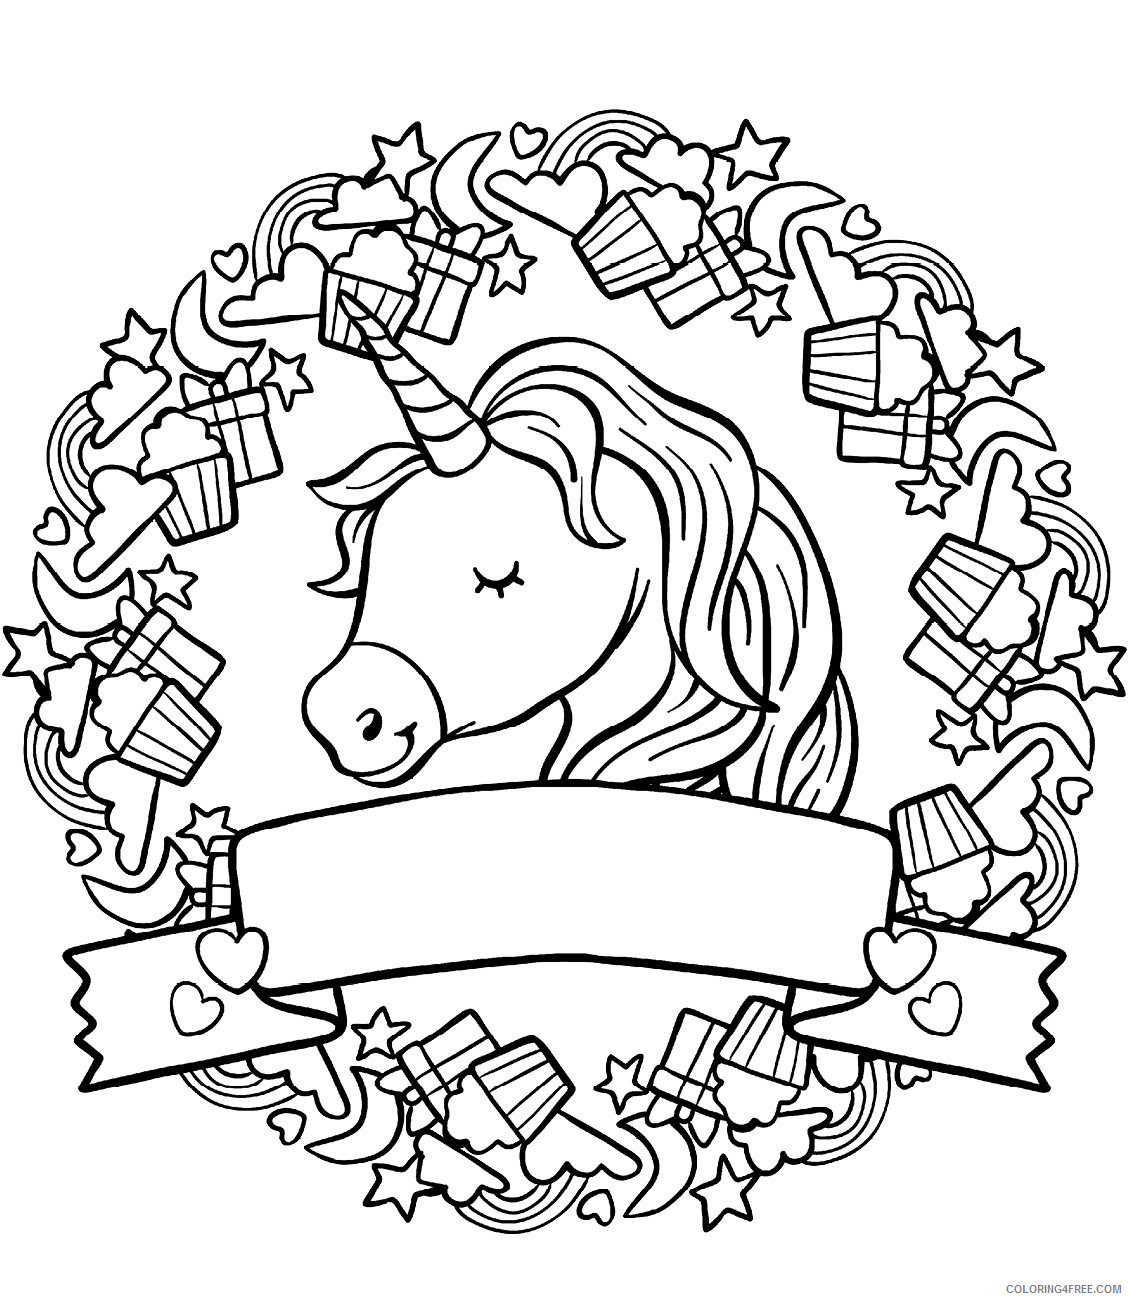 Unicorn Coloring Pages happy_face_unicorn Printable 2021 6040 Coloring4free